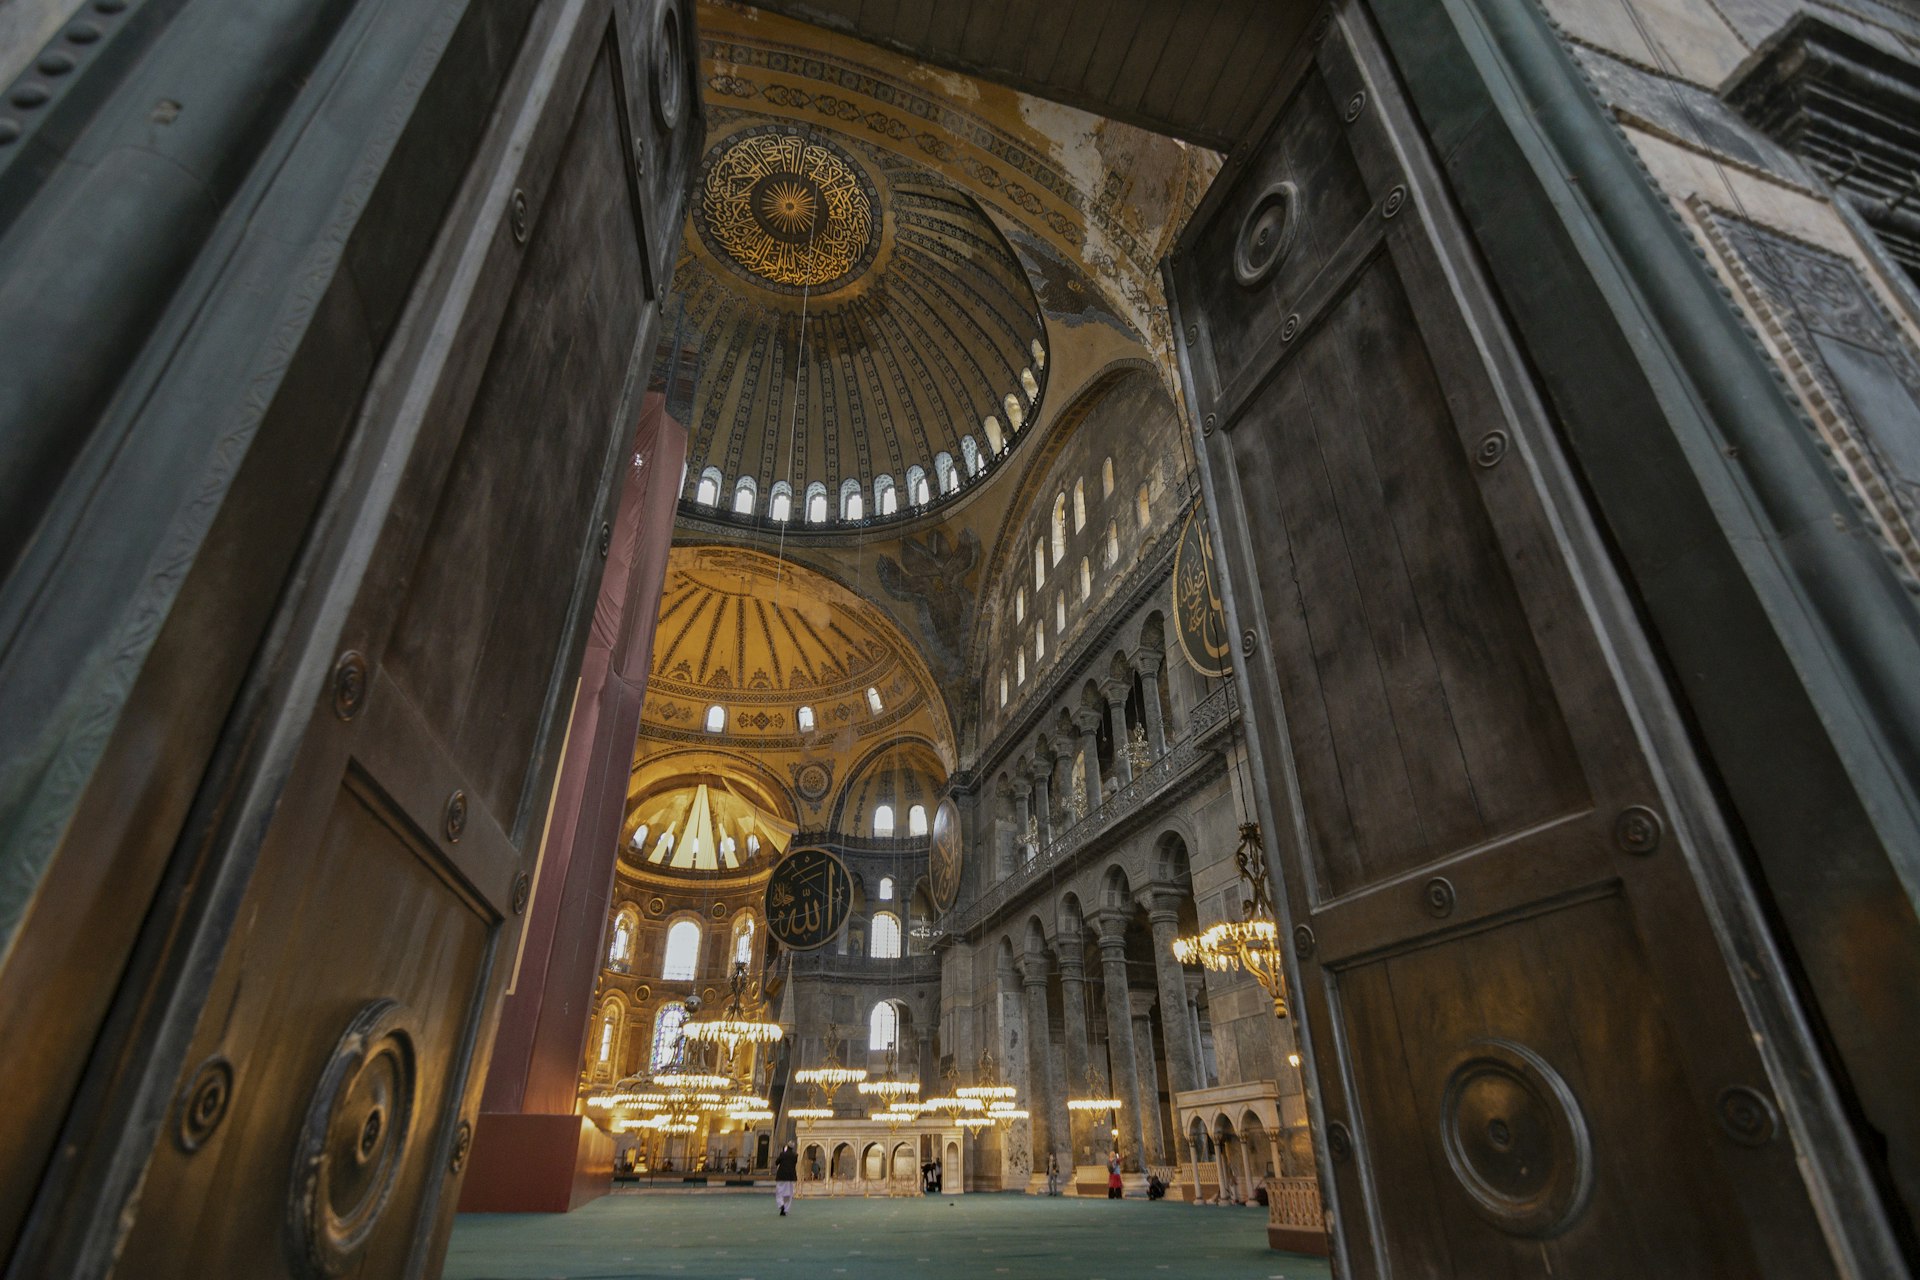 Interior view of The Hagia Sophia Grand Mosque, converted into the mosque from a museum in 2020. Local people waiting for prayer time (namaz) and tourists visiting the famous mosque of Istanbul, Turkey.